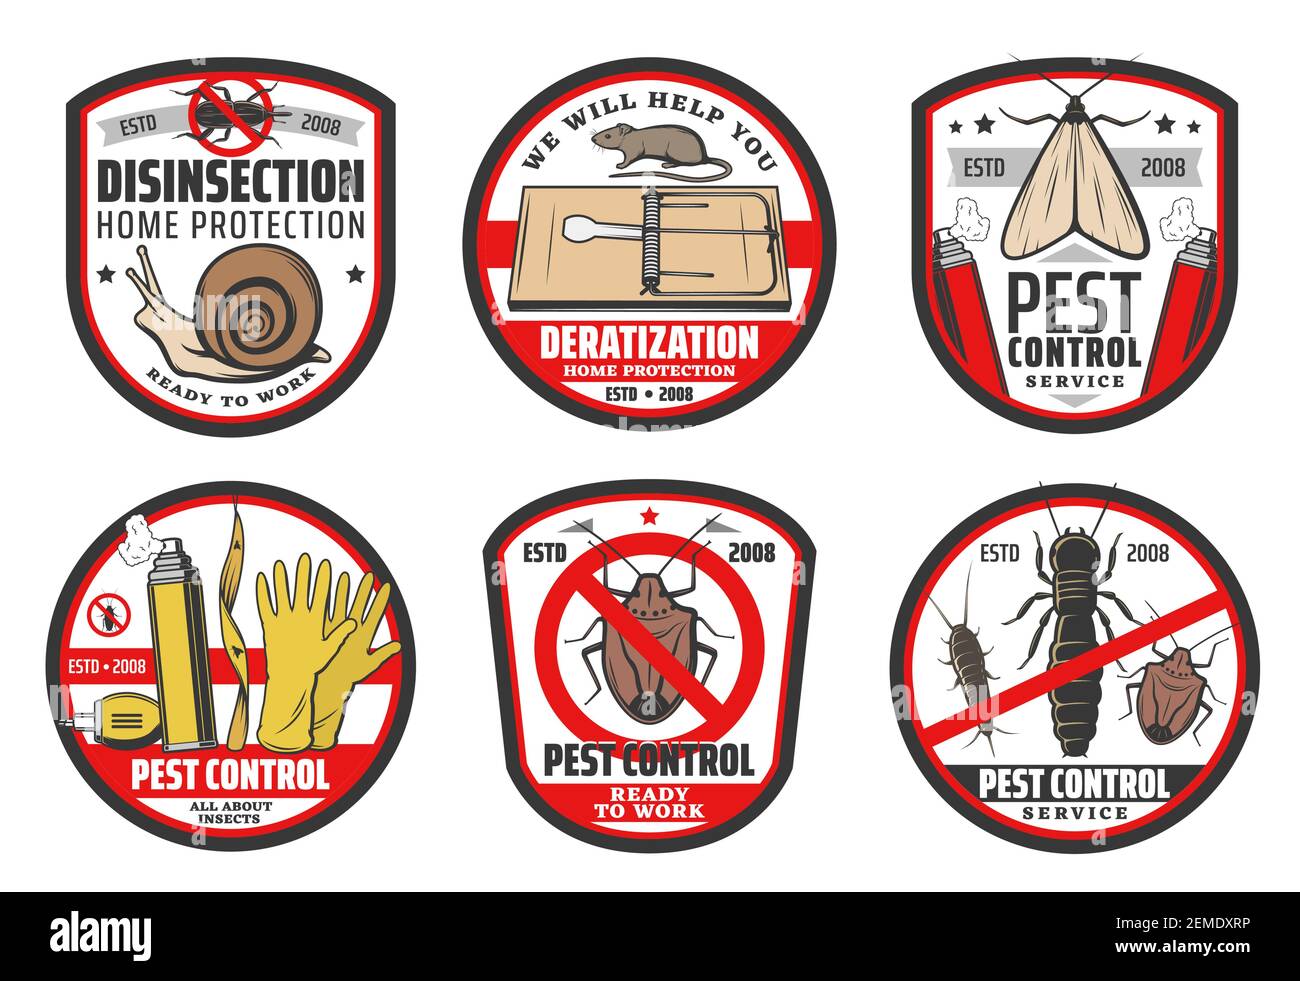 Pest control icons, insects disinfection, deratization and extermination service, vector signs. Insects and rodents pesto control, home disinfestation Stock Vector